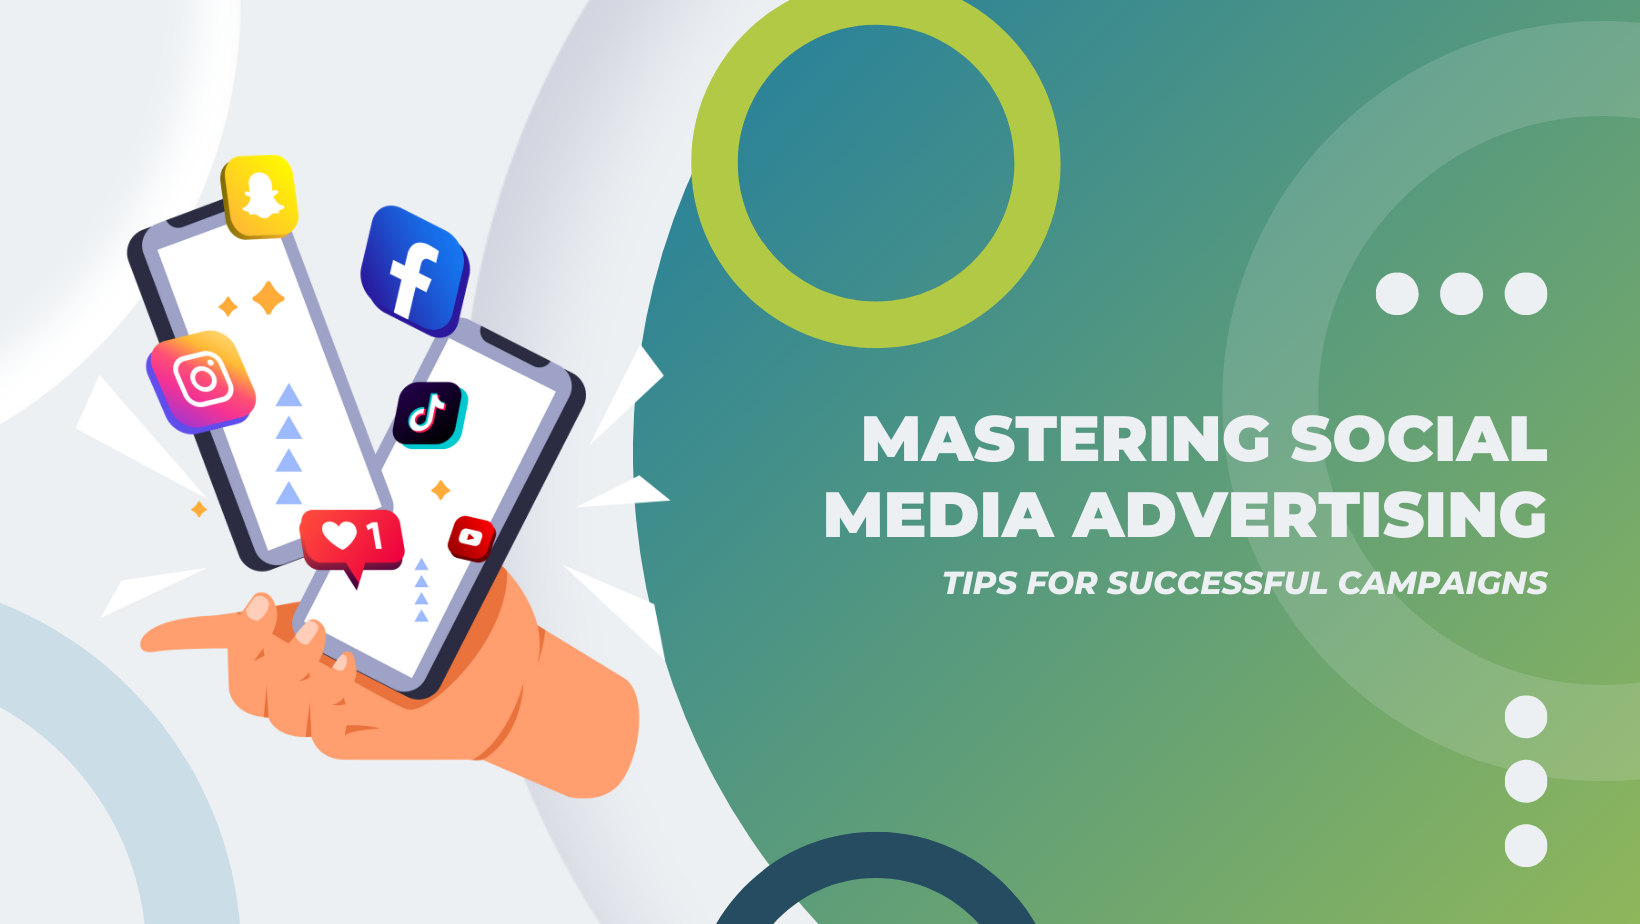 "Mastering Social Media Advertising: Tips for Successful Campaigns" graphic